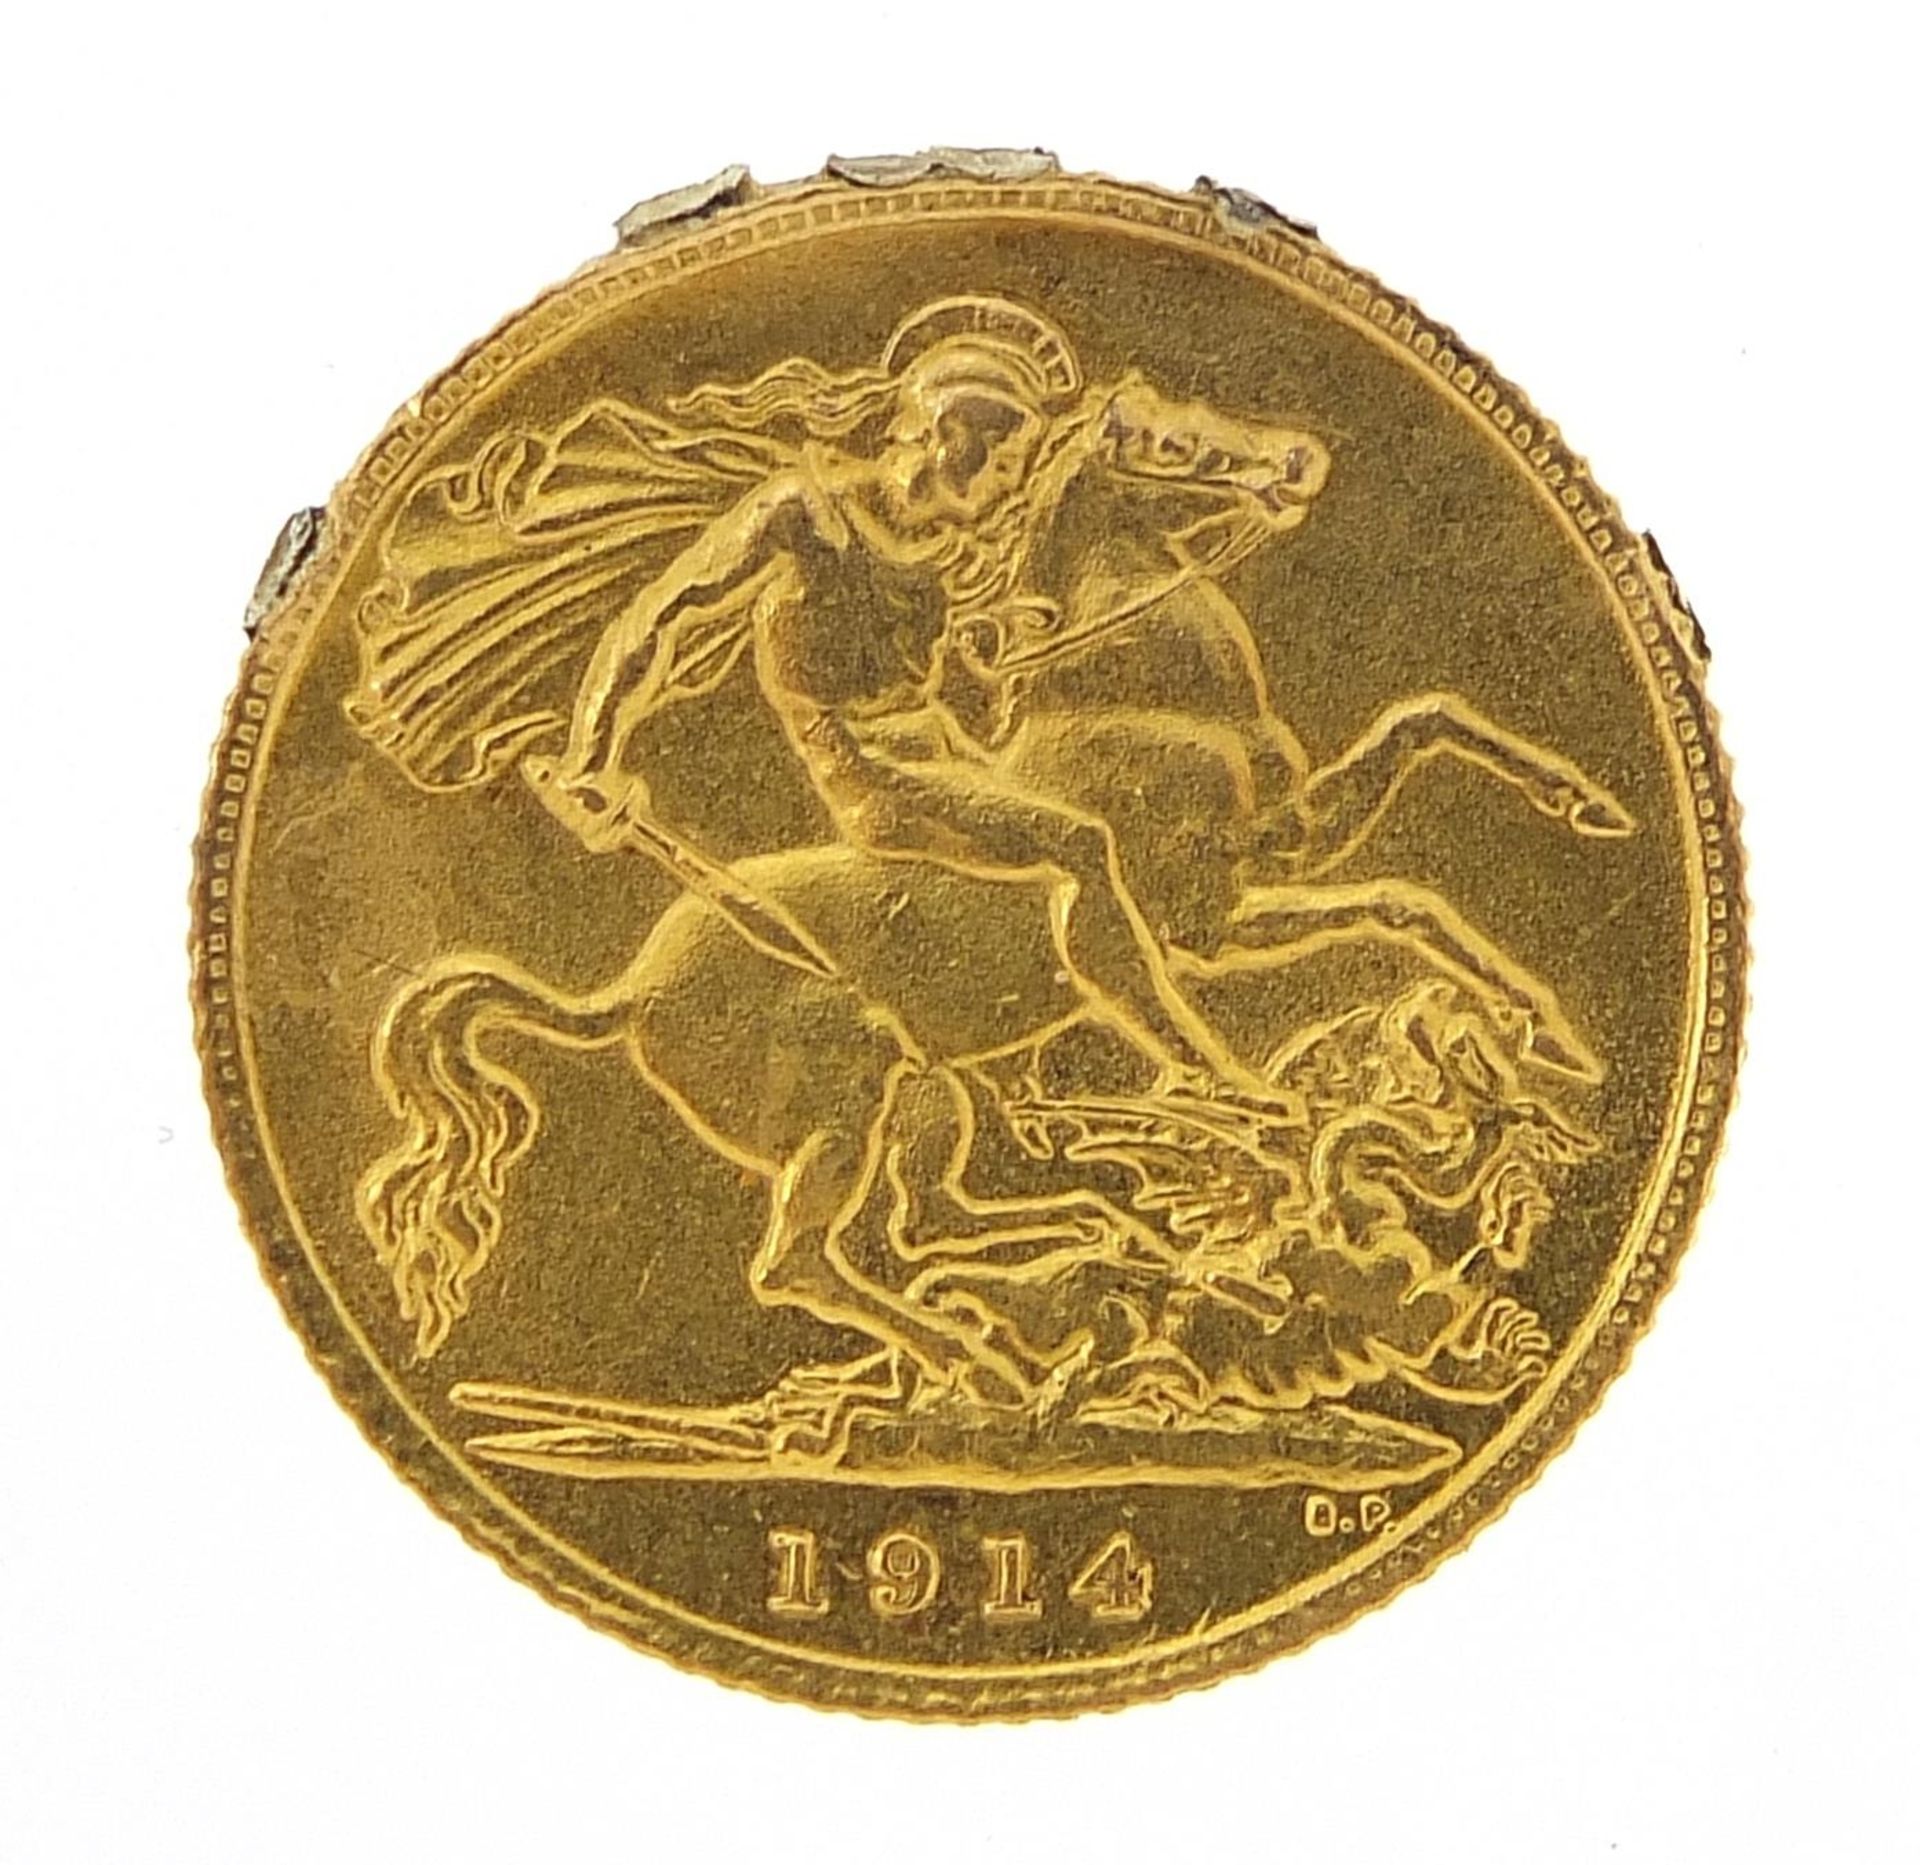 George V 1914 gold half sovereign - this lot is sold without buyer's premium